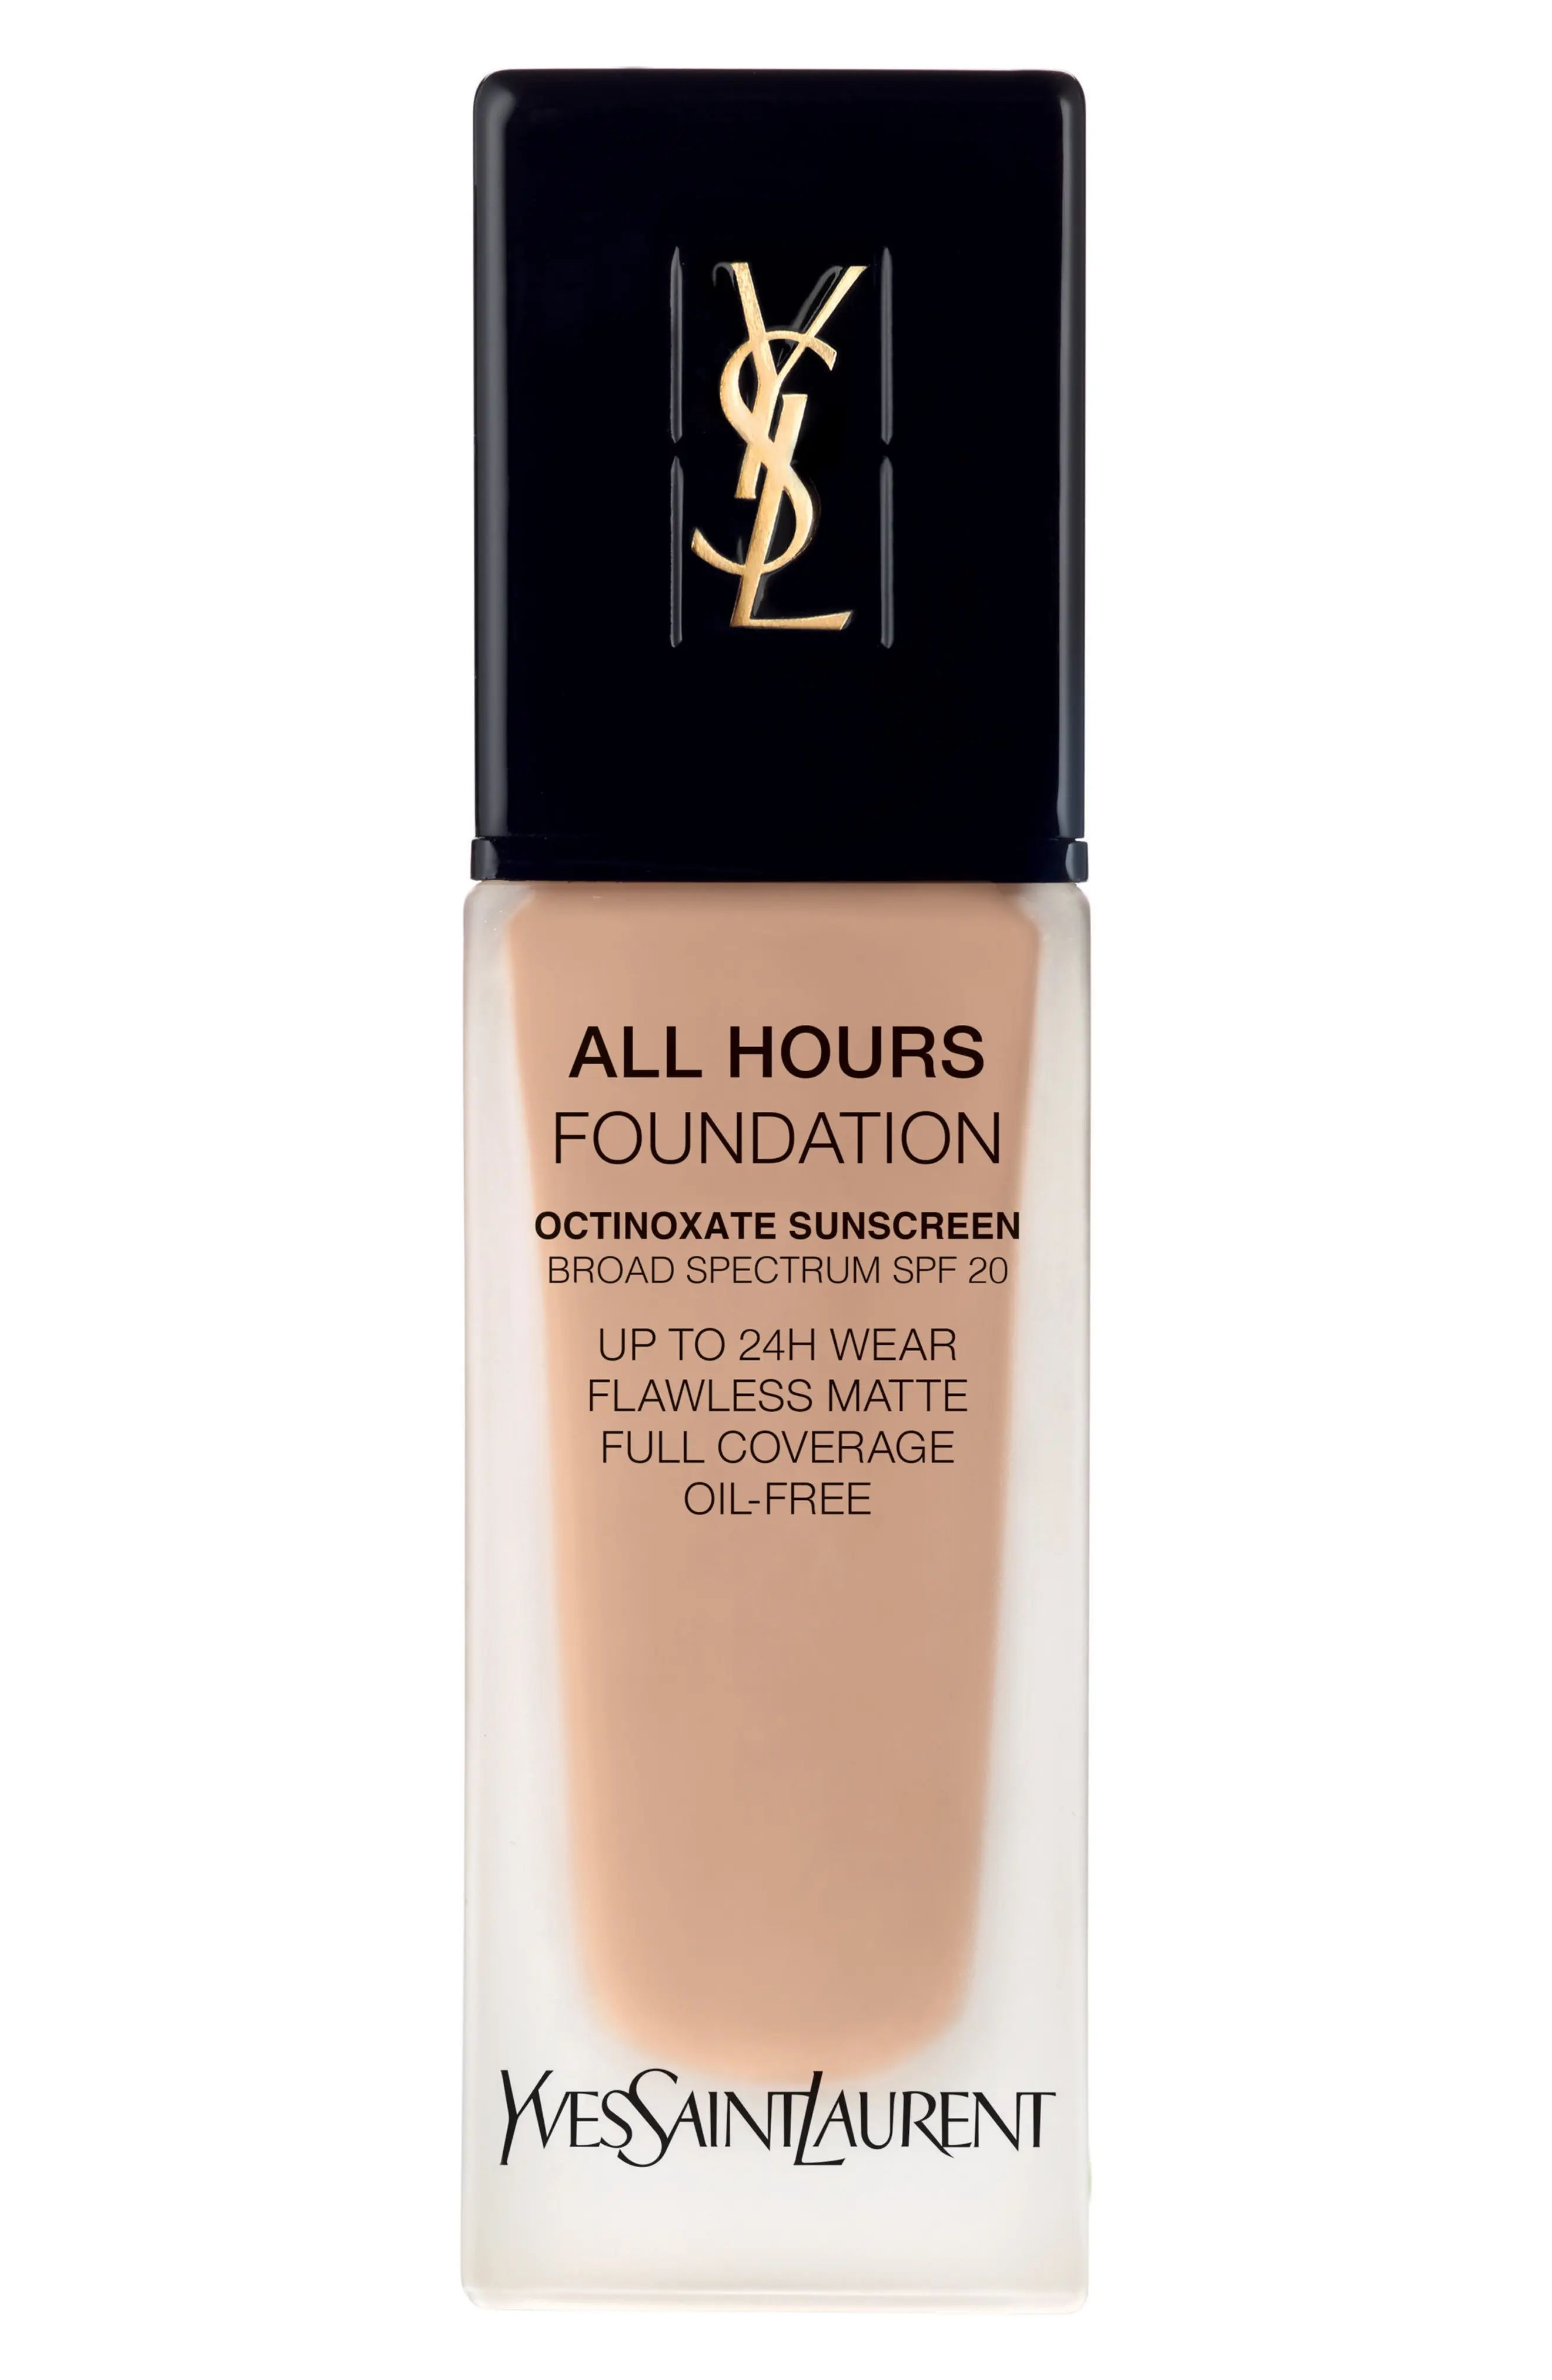 Yves Saint Laurent All Hours Full Coverage Matte Foundation Broad Spectrum SPF 20 in B40 Sand at Nor | Nordstrom